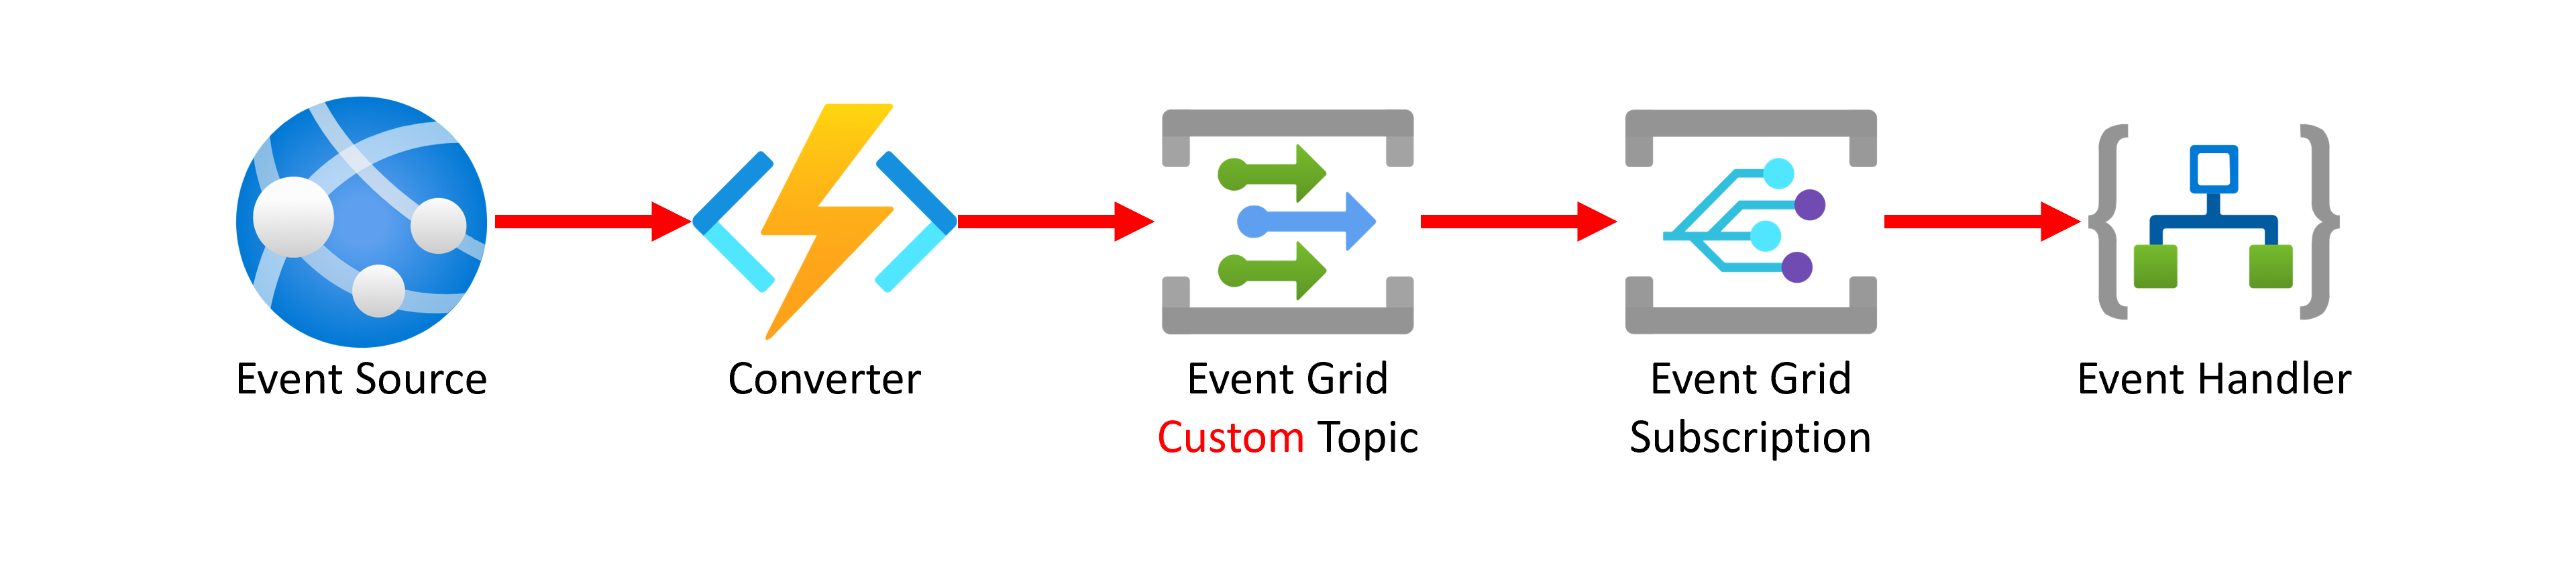 Azure Event Grid for Applications outside Azure with Converter